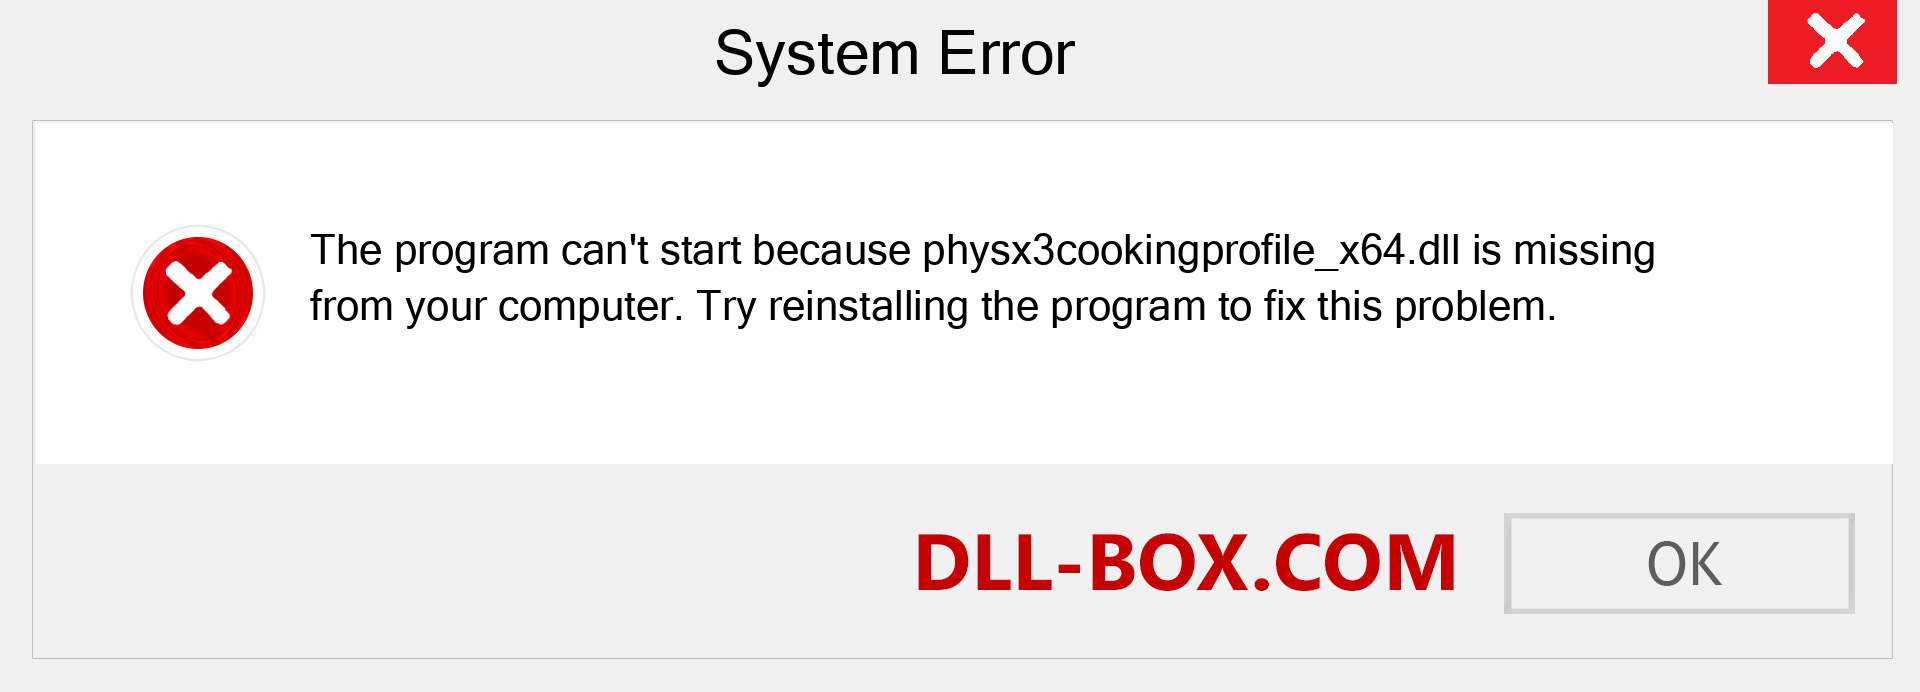  physx3cookingprofile_x64.dll file is missing?. Download for Windows 7, 8, 10 - Fix  physx3cookingprofile_x64 dll Missing Error on Windows, photos, images